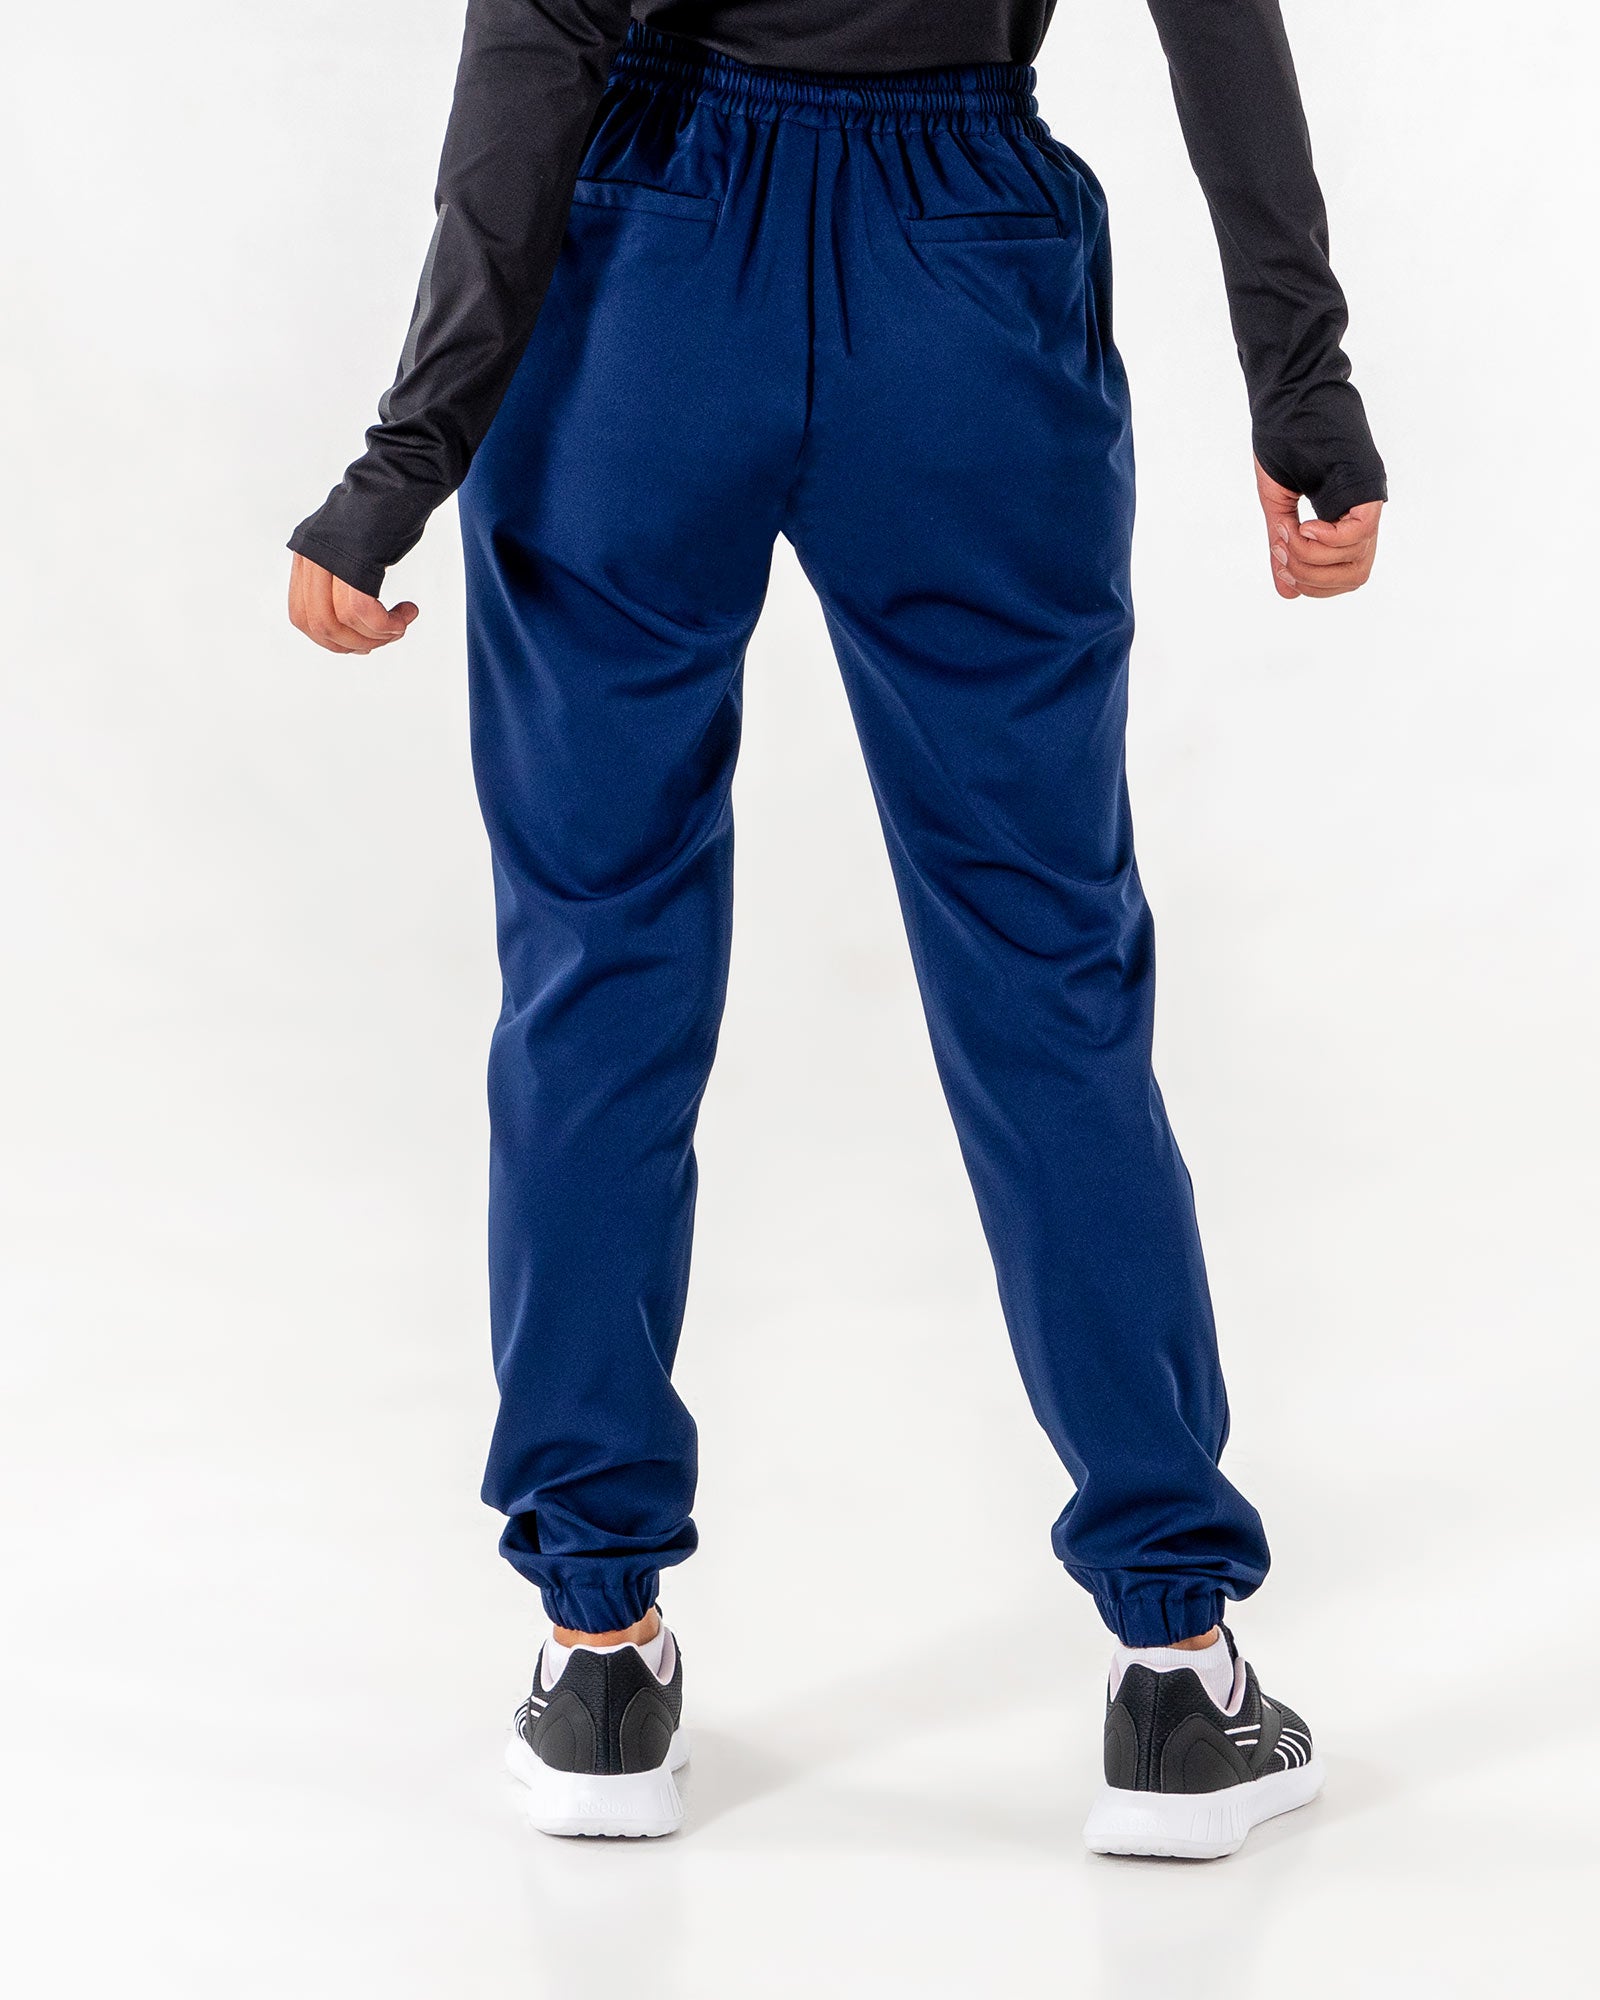 Glider Drawstring Jogger in dark blue by Veil Garments. Modest activewear collection.